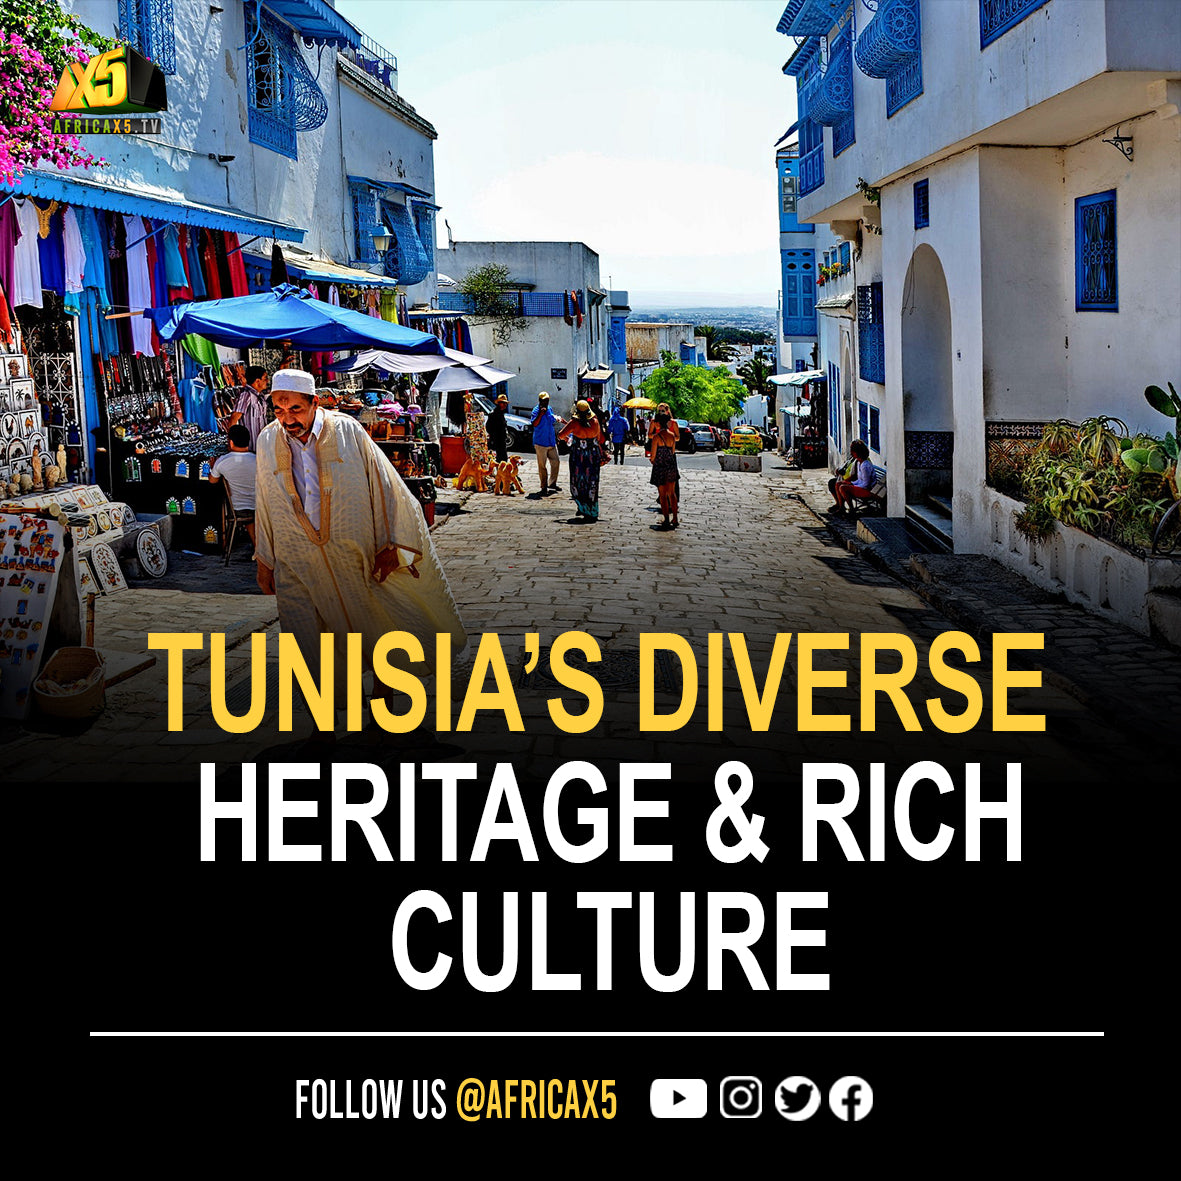 Tunisia's diverse heritage, from ancient Carthage to the African Spring. Rich culture, historic sites, and Mediterranean allure await discovery.